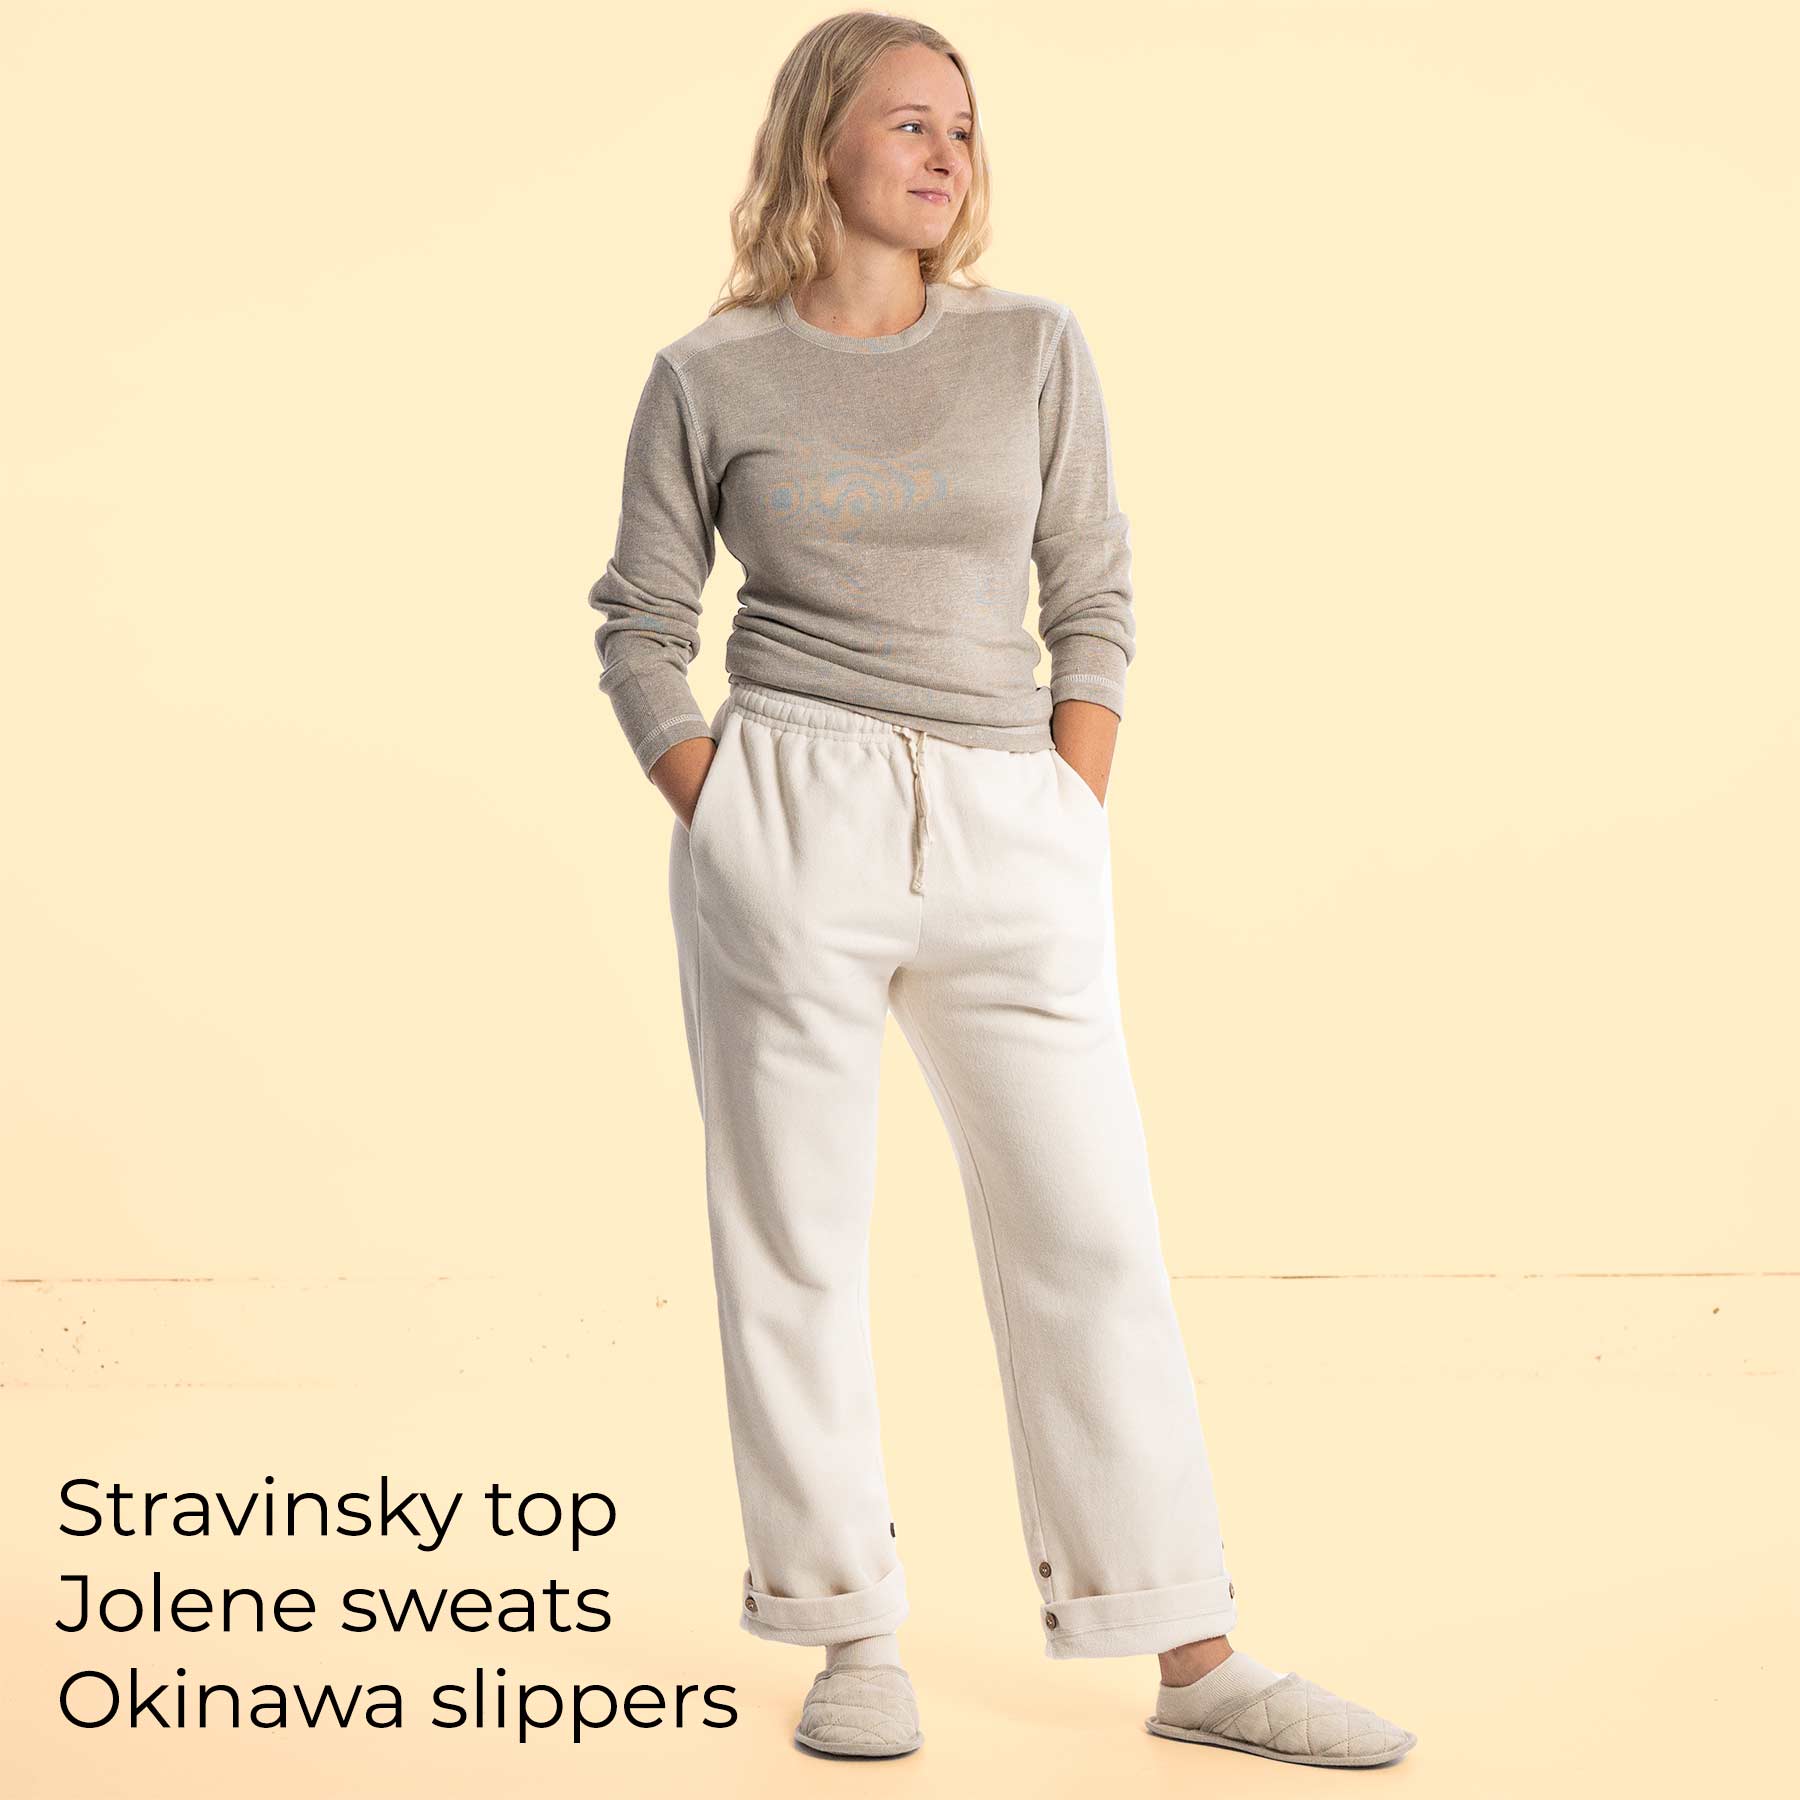 Buy DYWER Women's Skinny Fit Yoga Trackpants for Girls & Women